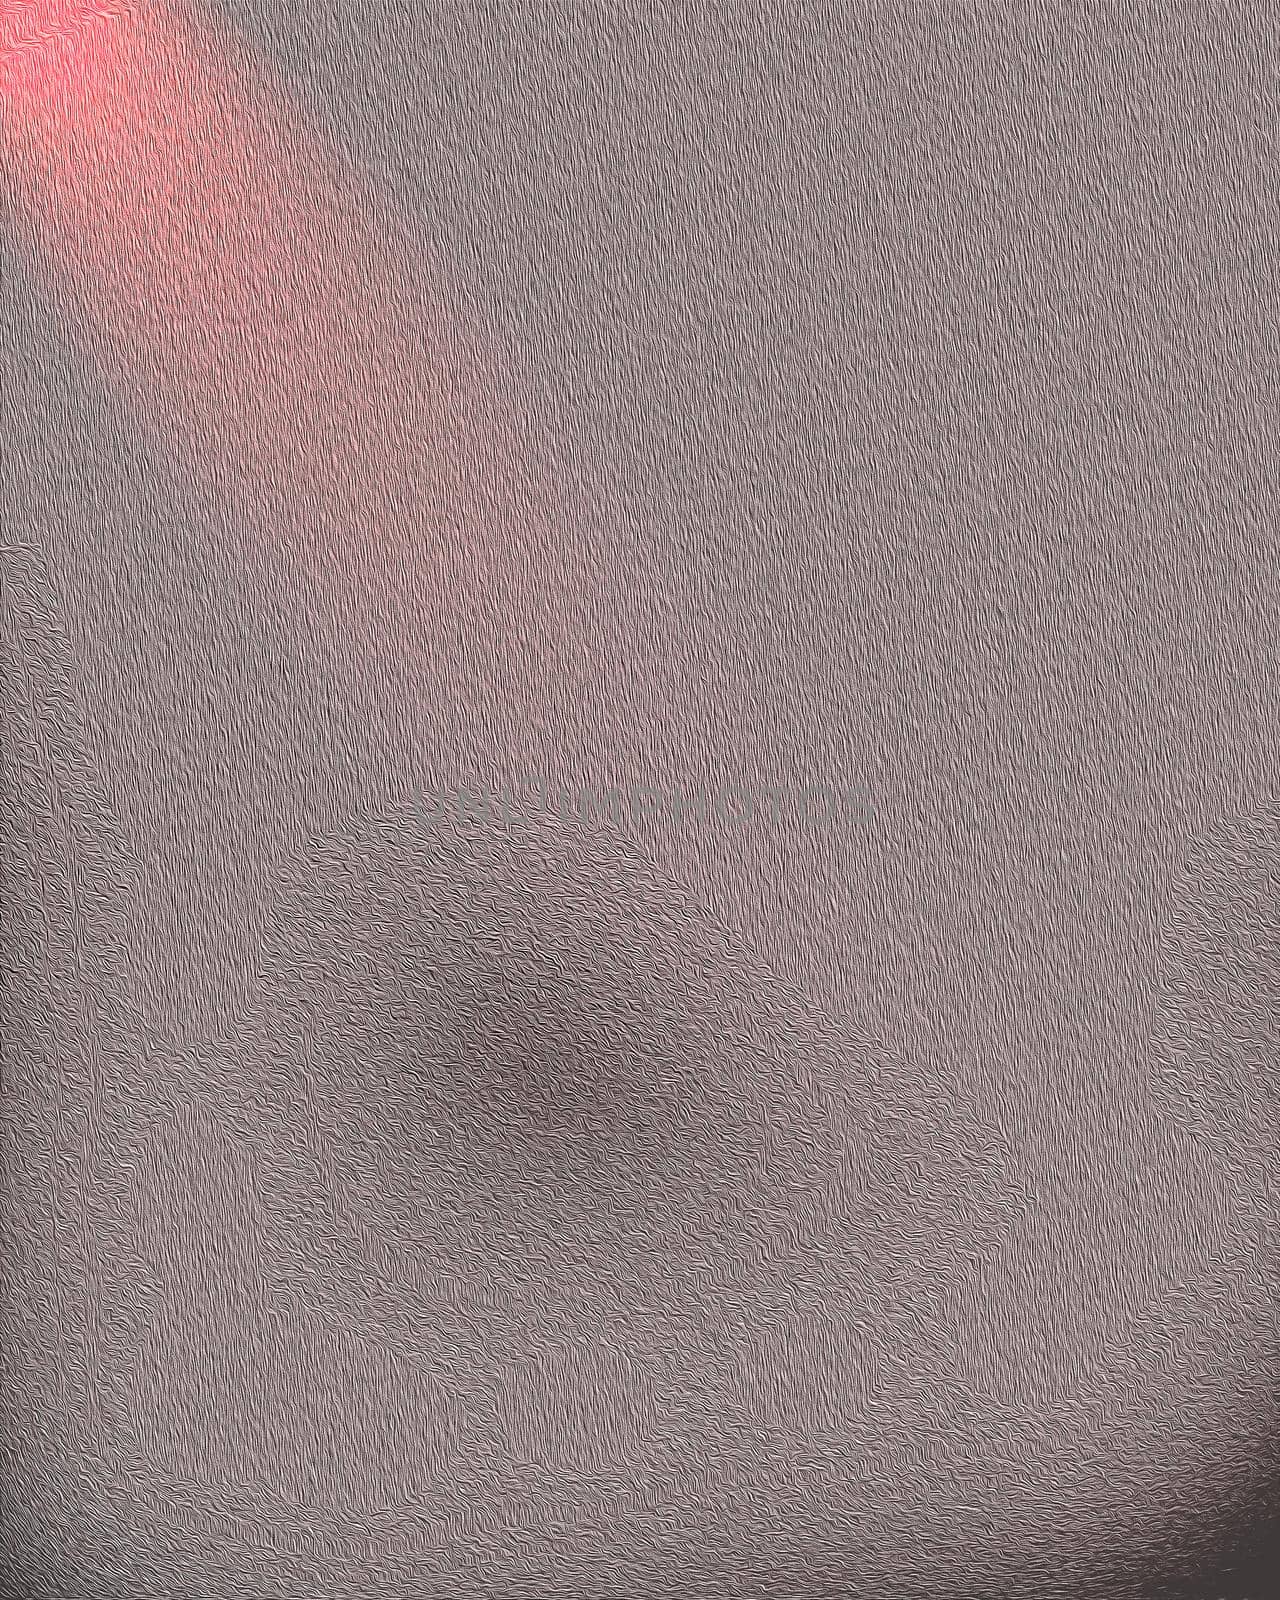 Abstract Textured fur surface  with red light leak